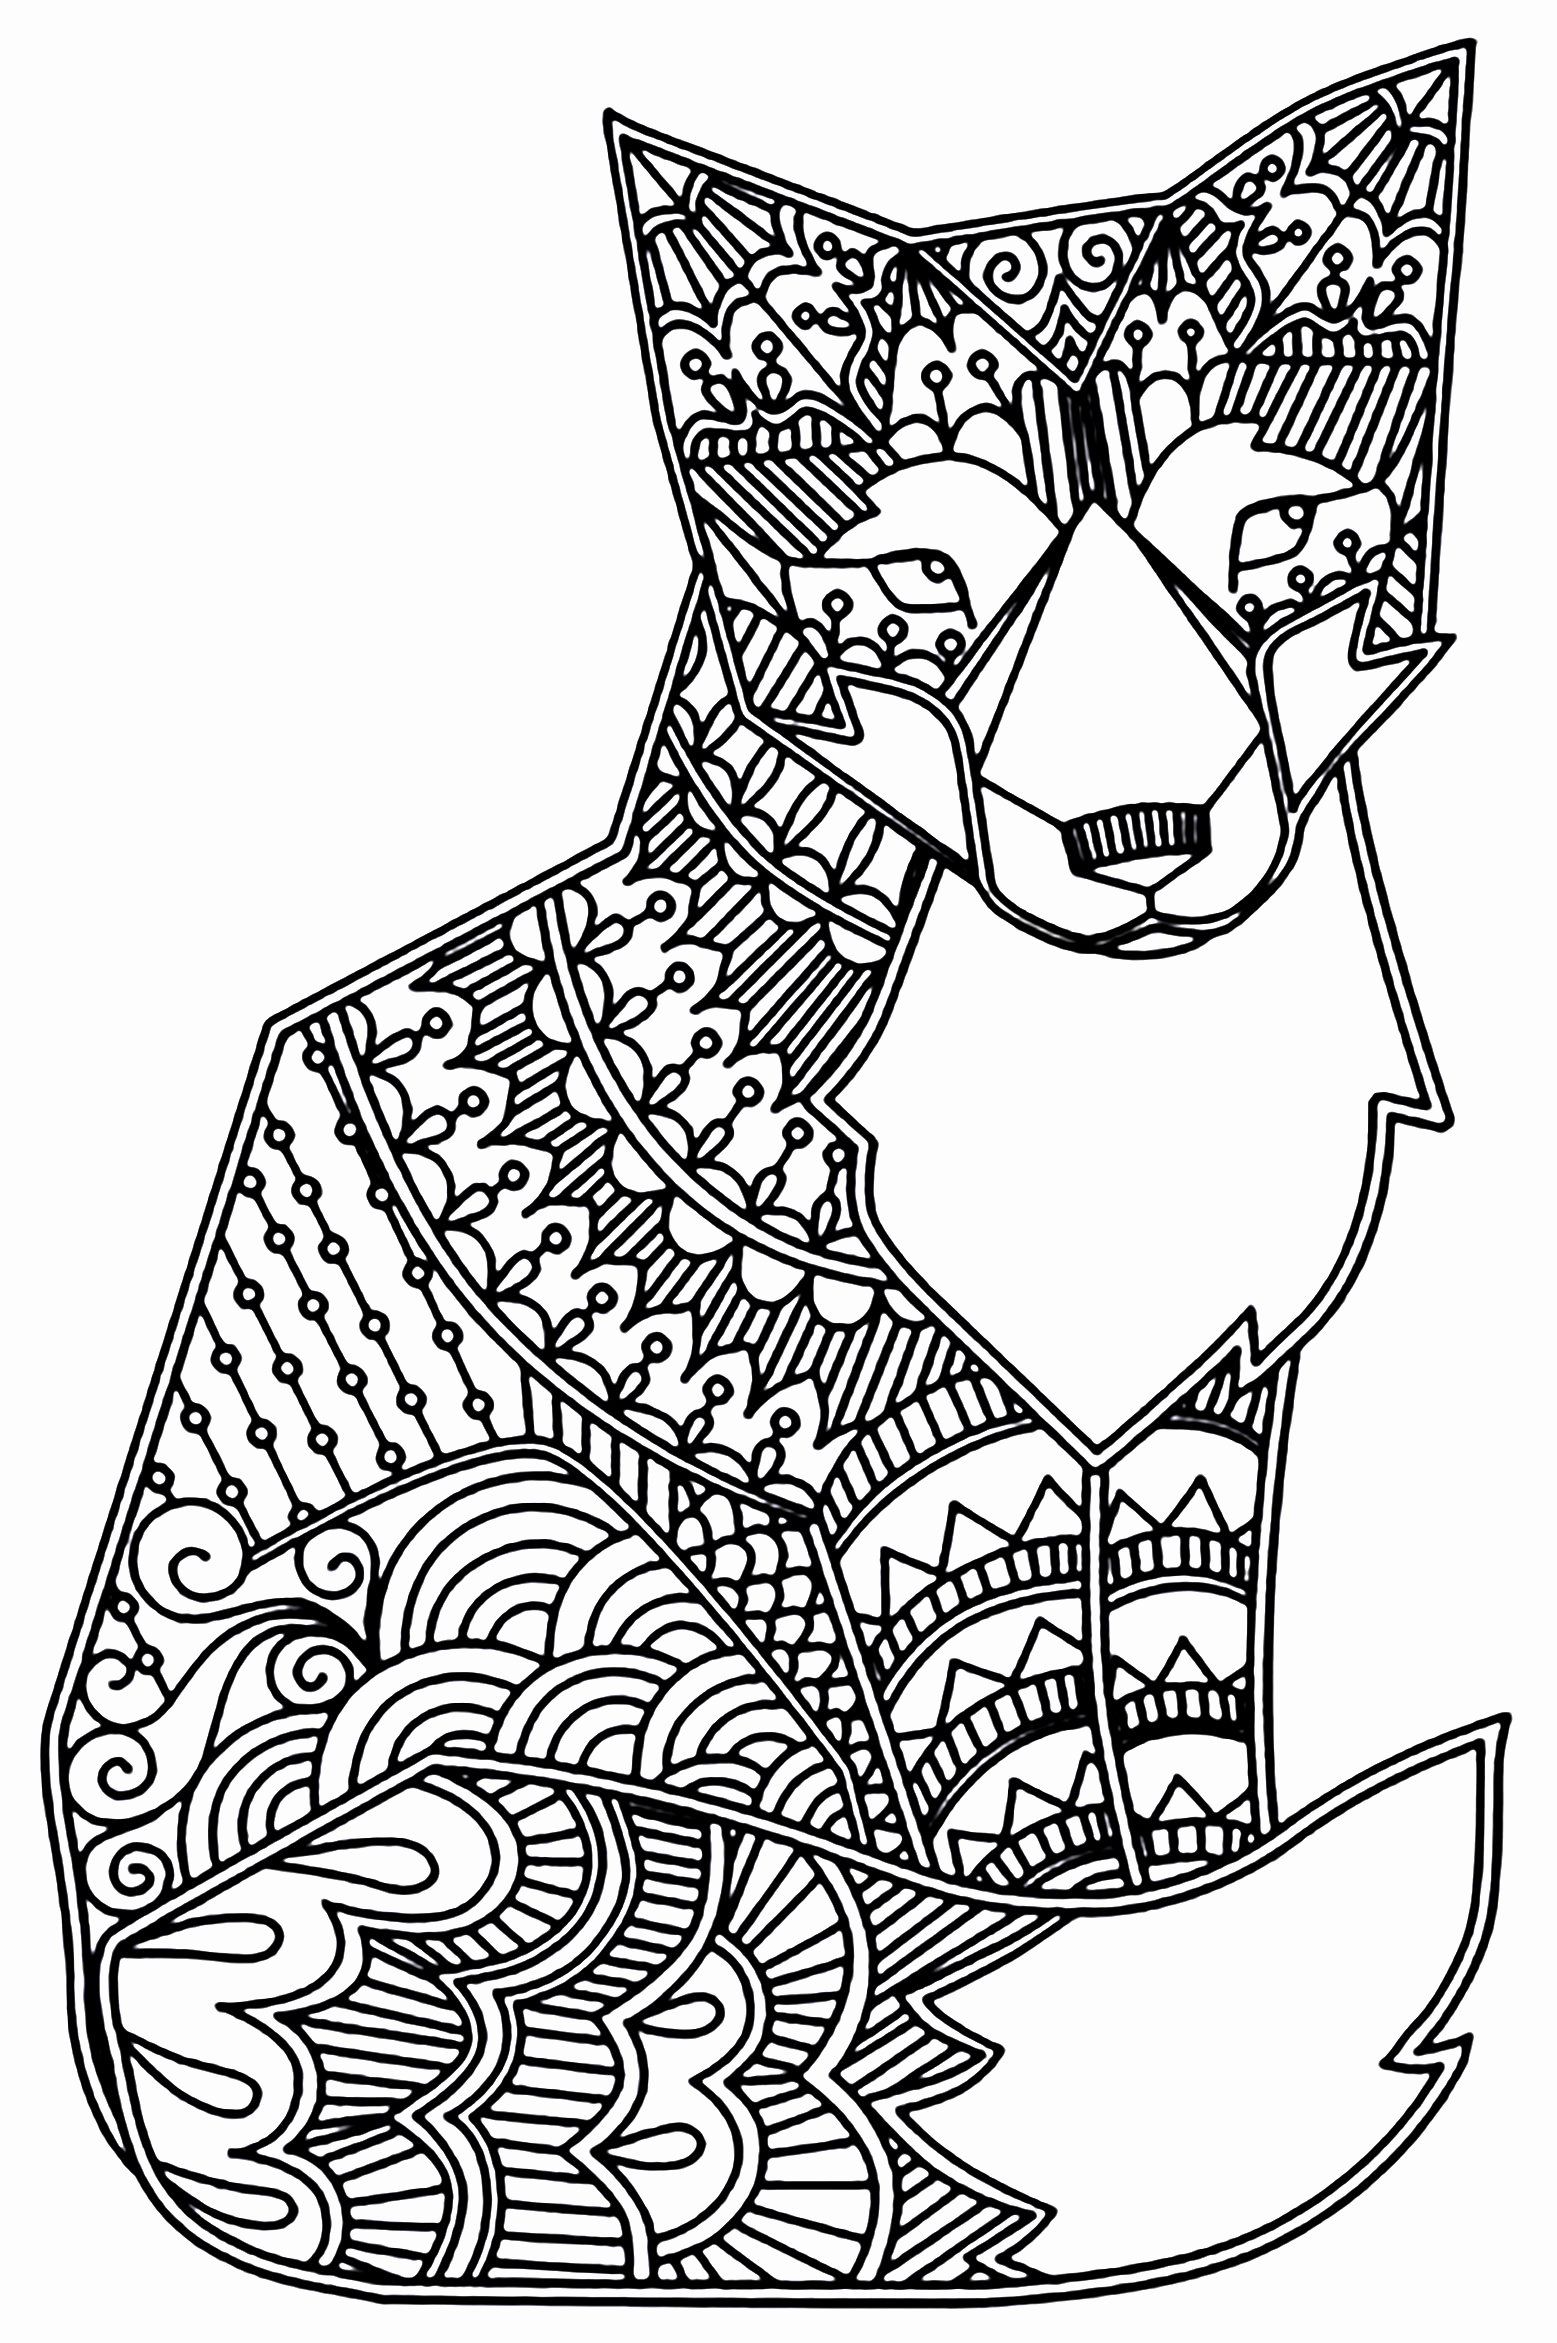 Mythical Printable Coloring Pages Fox   Coloring Pages Ideas ...